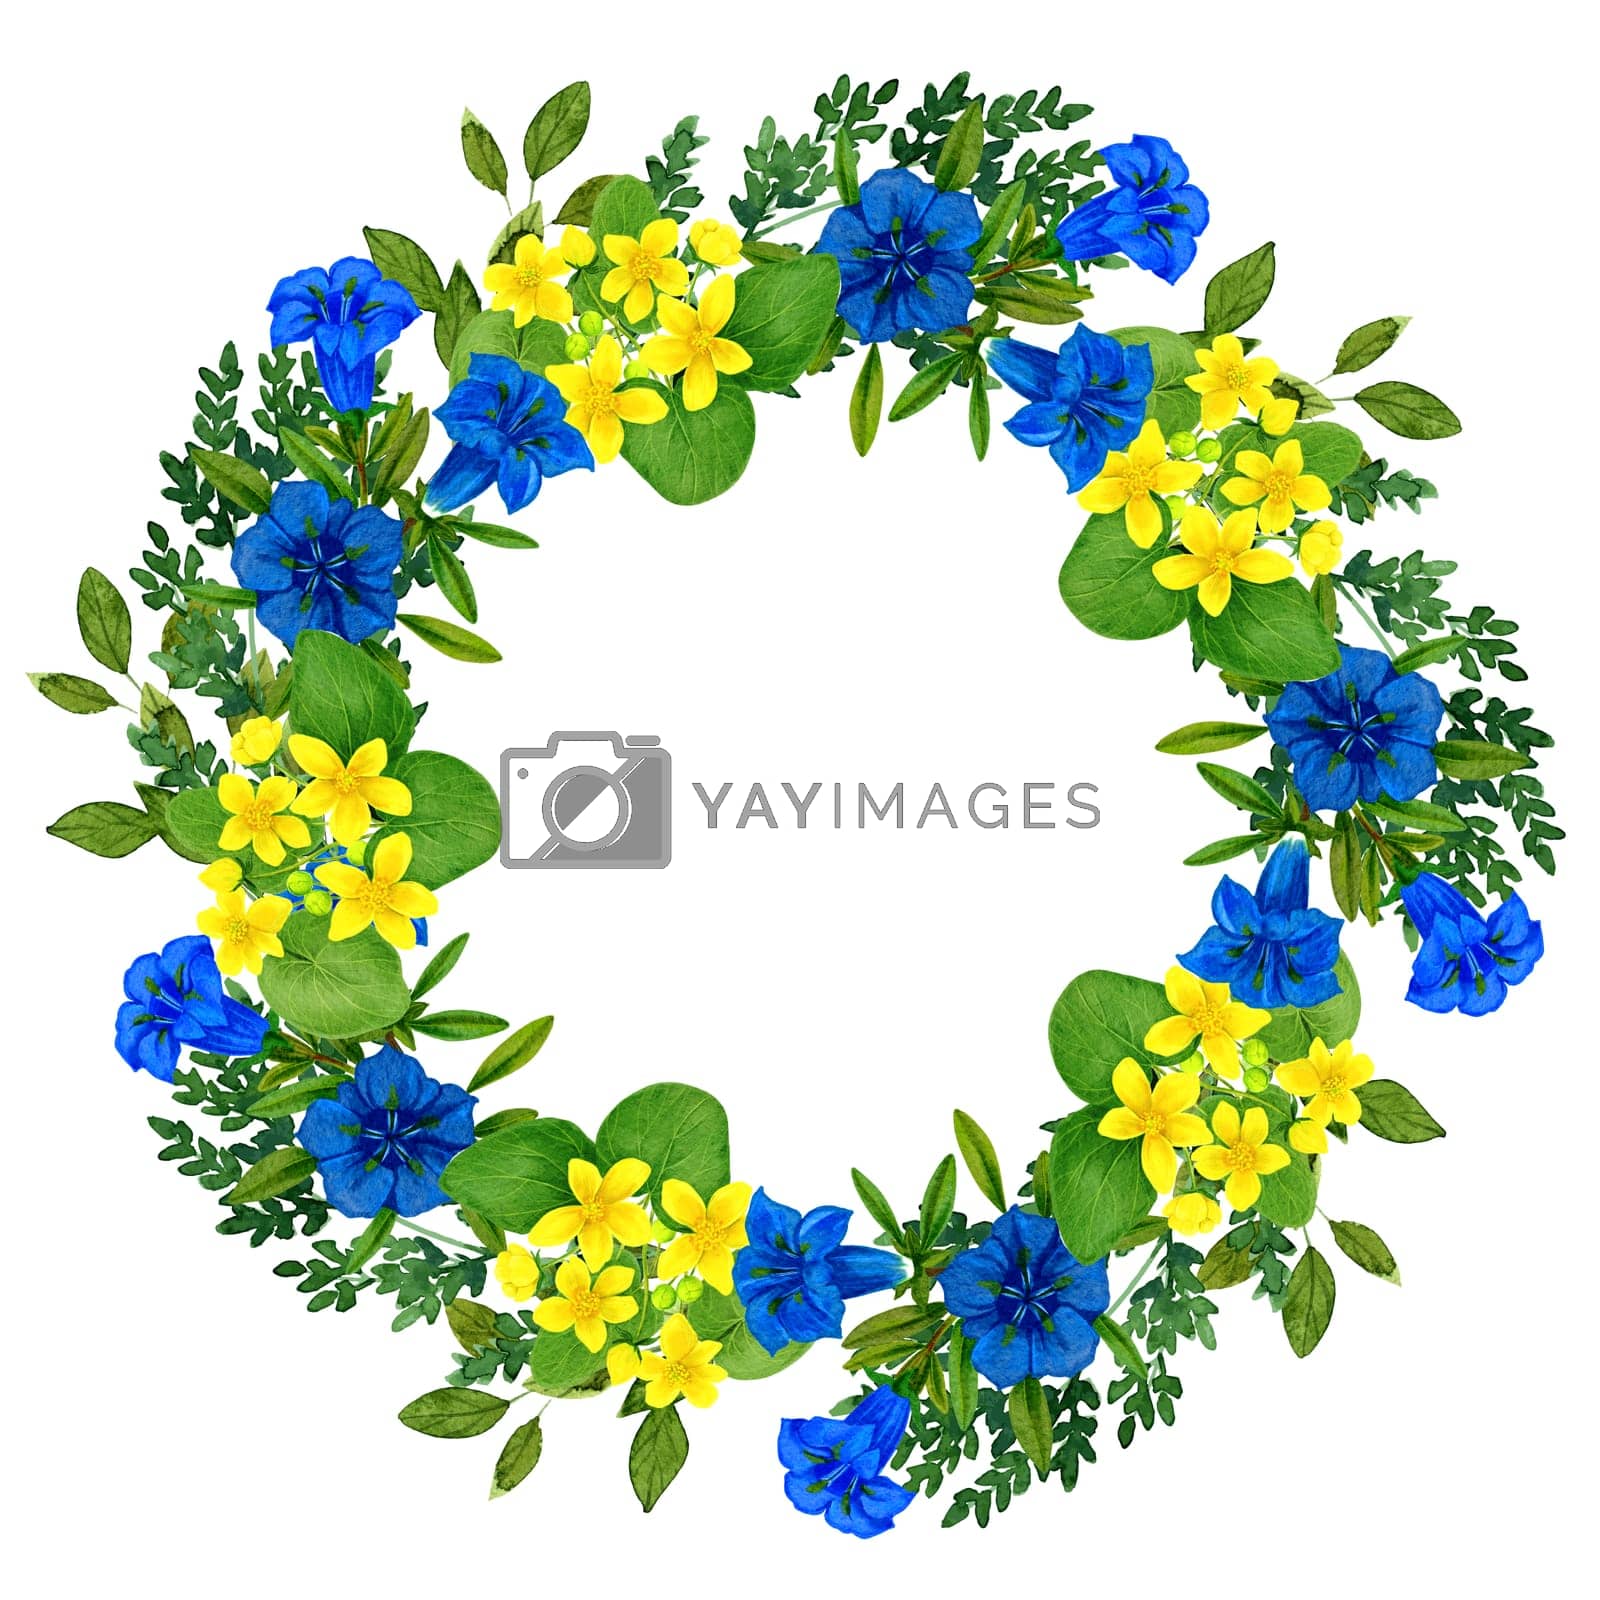 Royalty free image of Wild flowers wreath with caltha gentian and greenery by Julia_Solomatina_Art